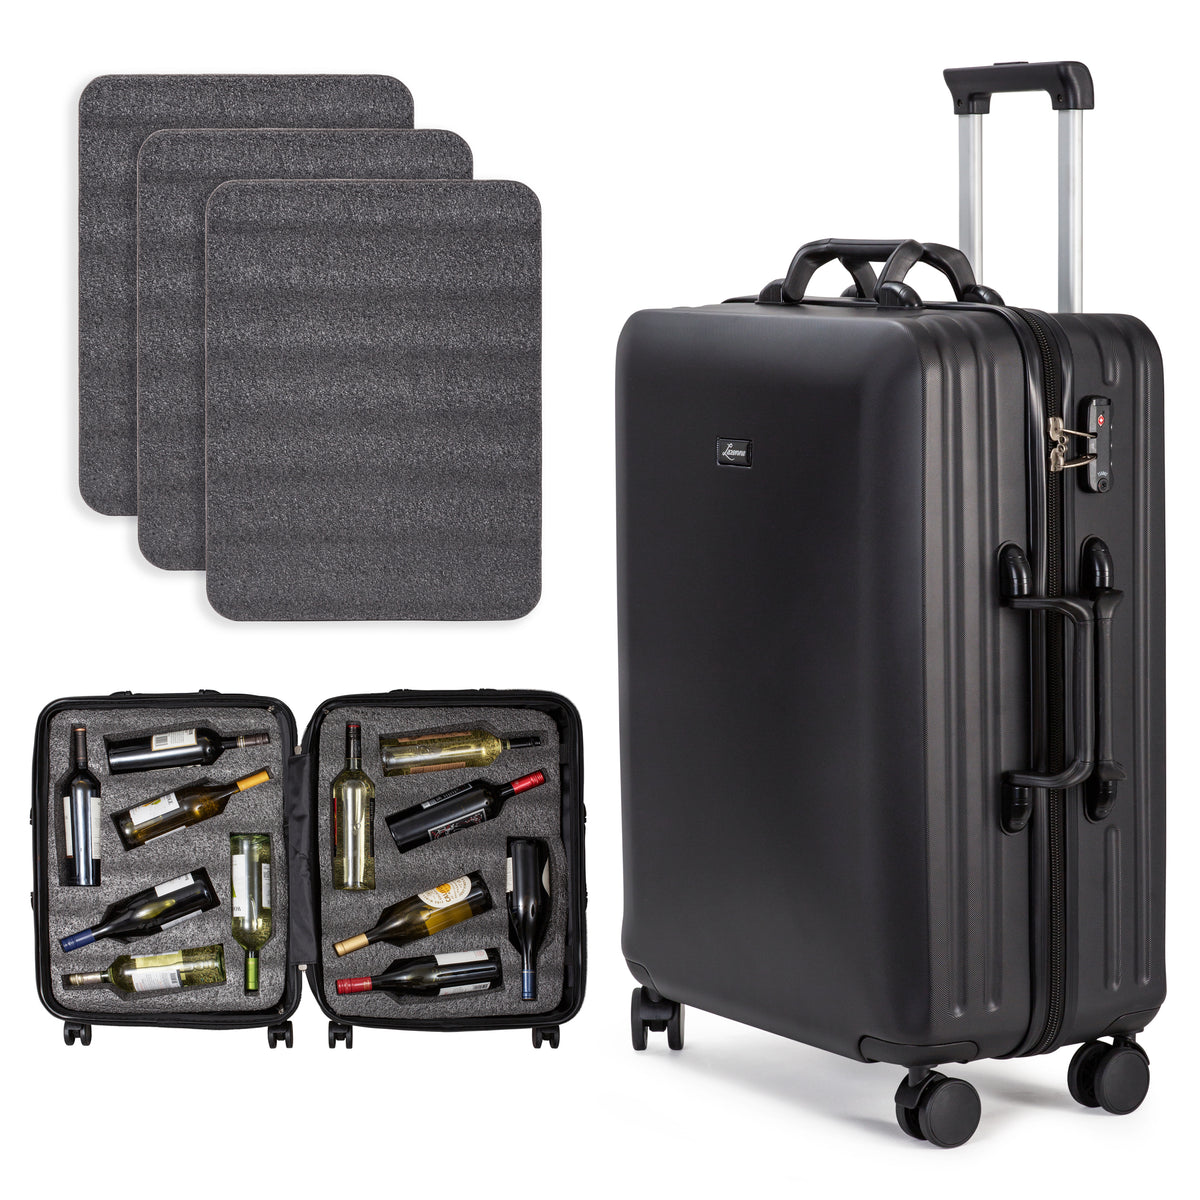 3 IN 1 WINE (O-N-E) HARDCASE for 6 or 12 bottles with removable inserts - TSA AIRLINE APPROVED, 10-YEARS WARRANTY